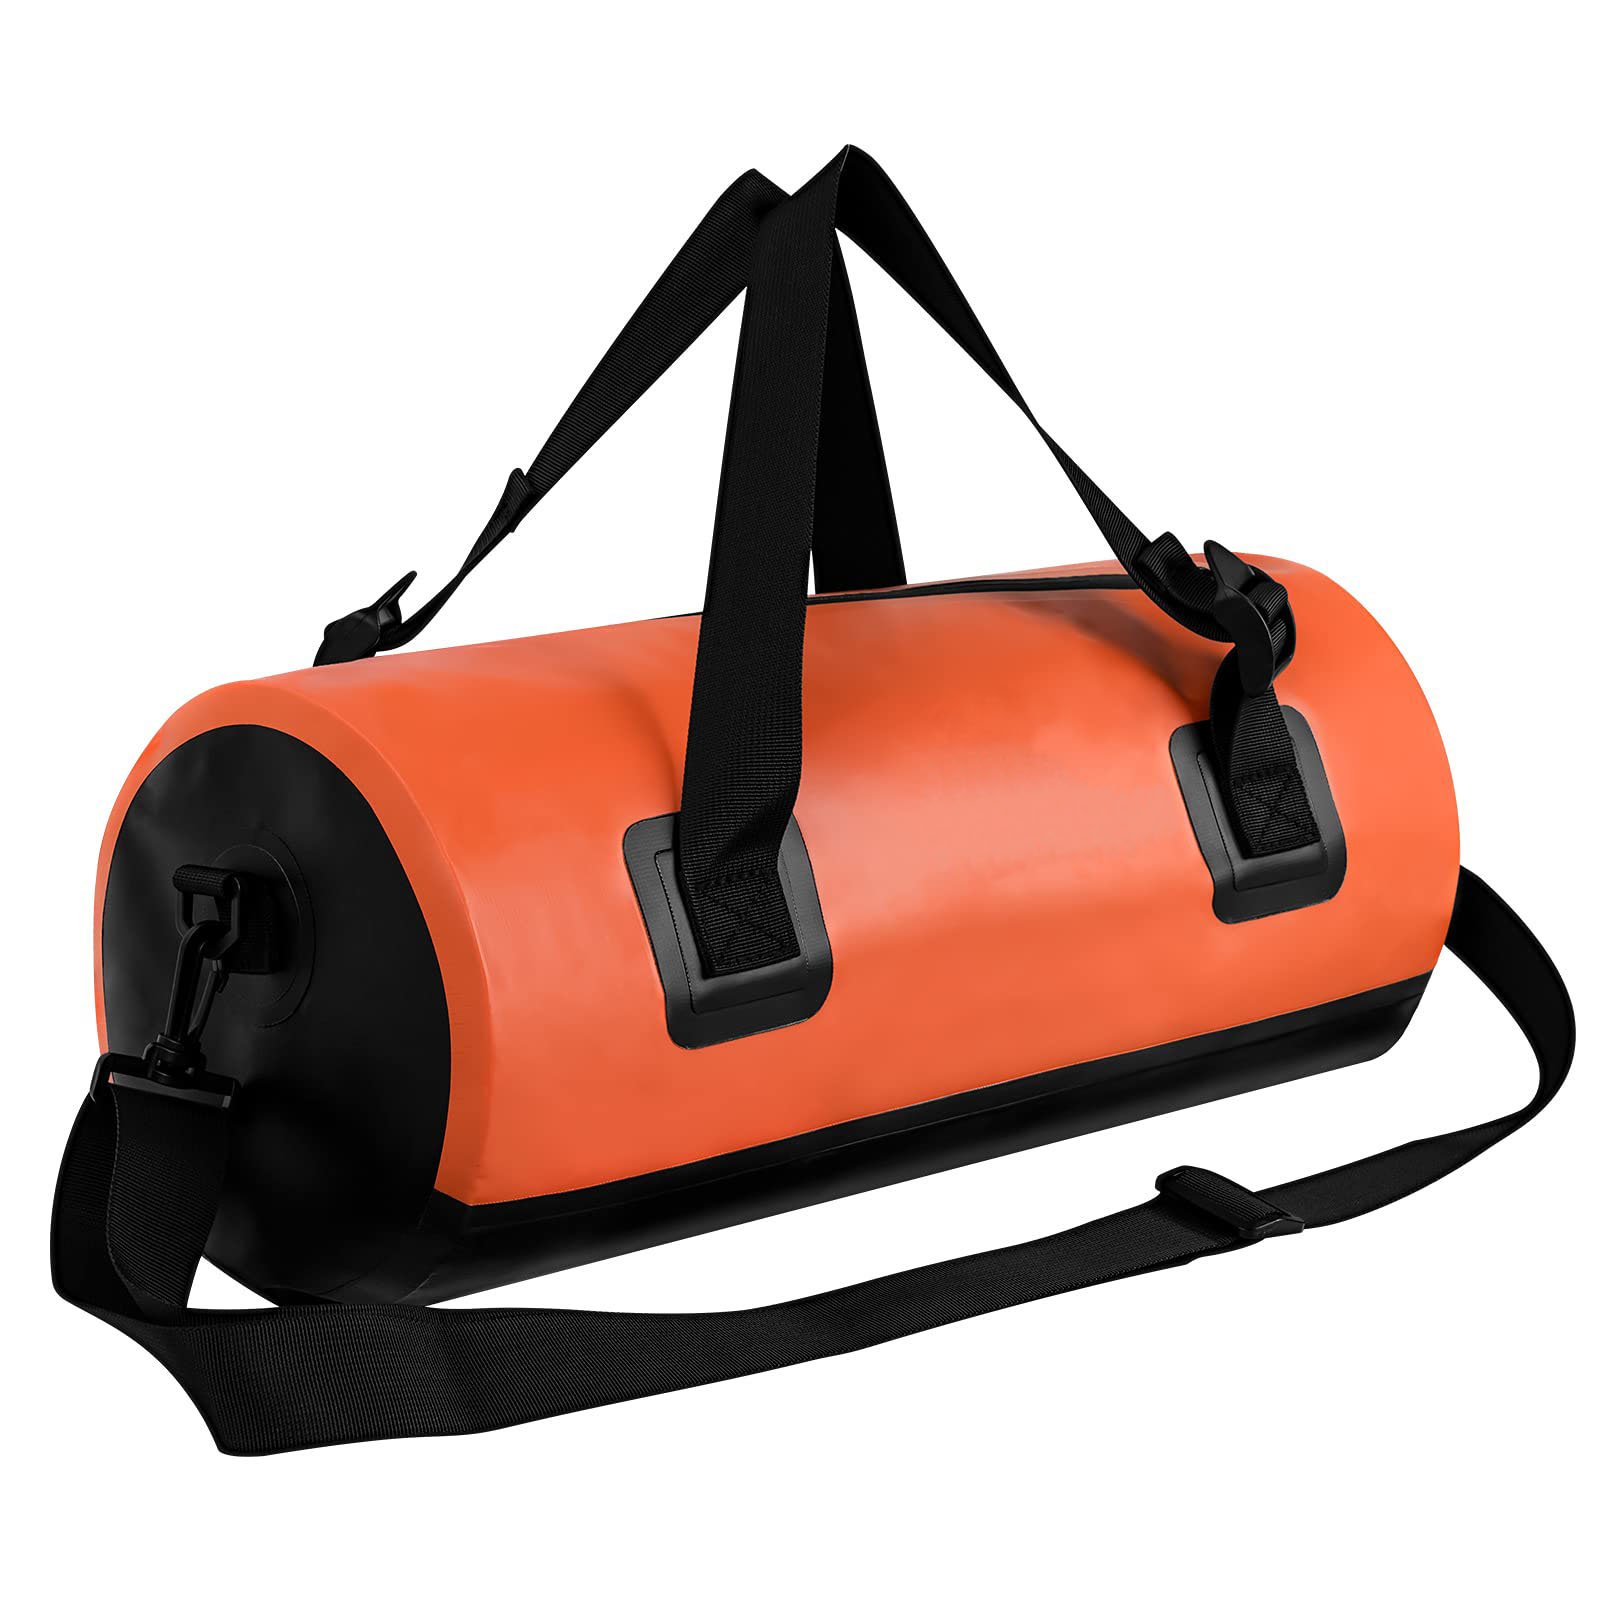 Waterproof Duffel Bag, Lightweight Dry Bag Duffel with Durable Straps and Handles